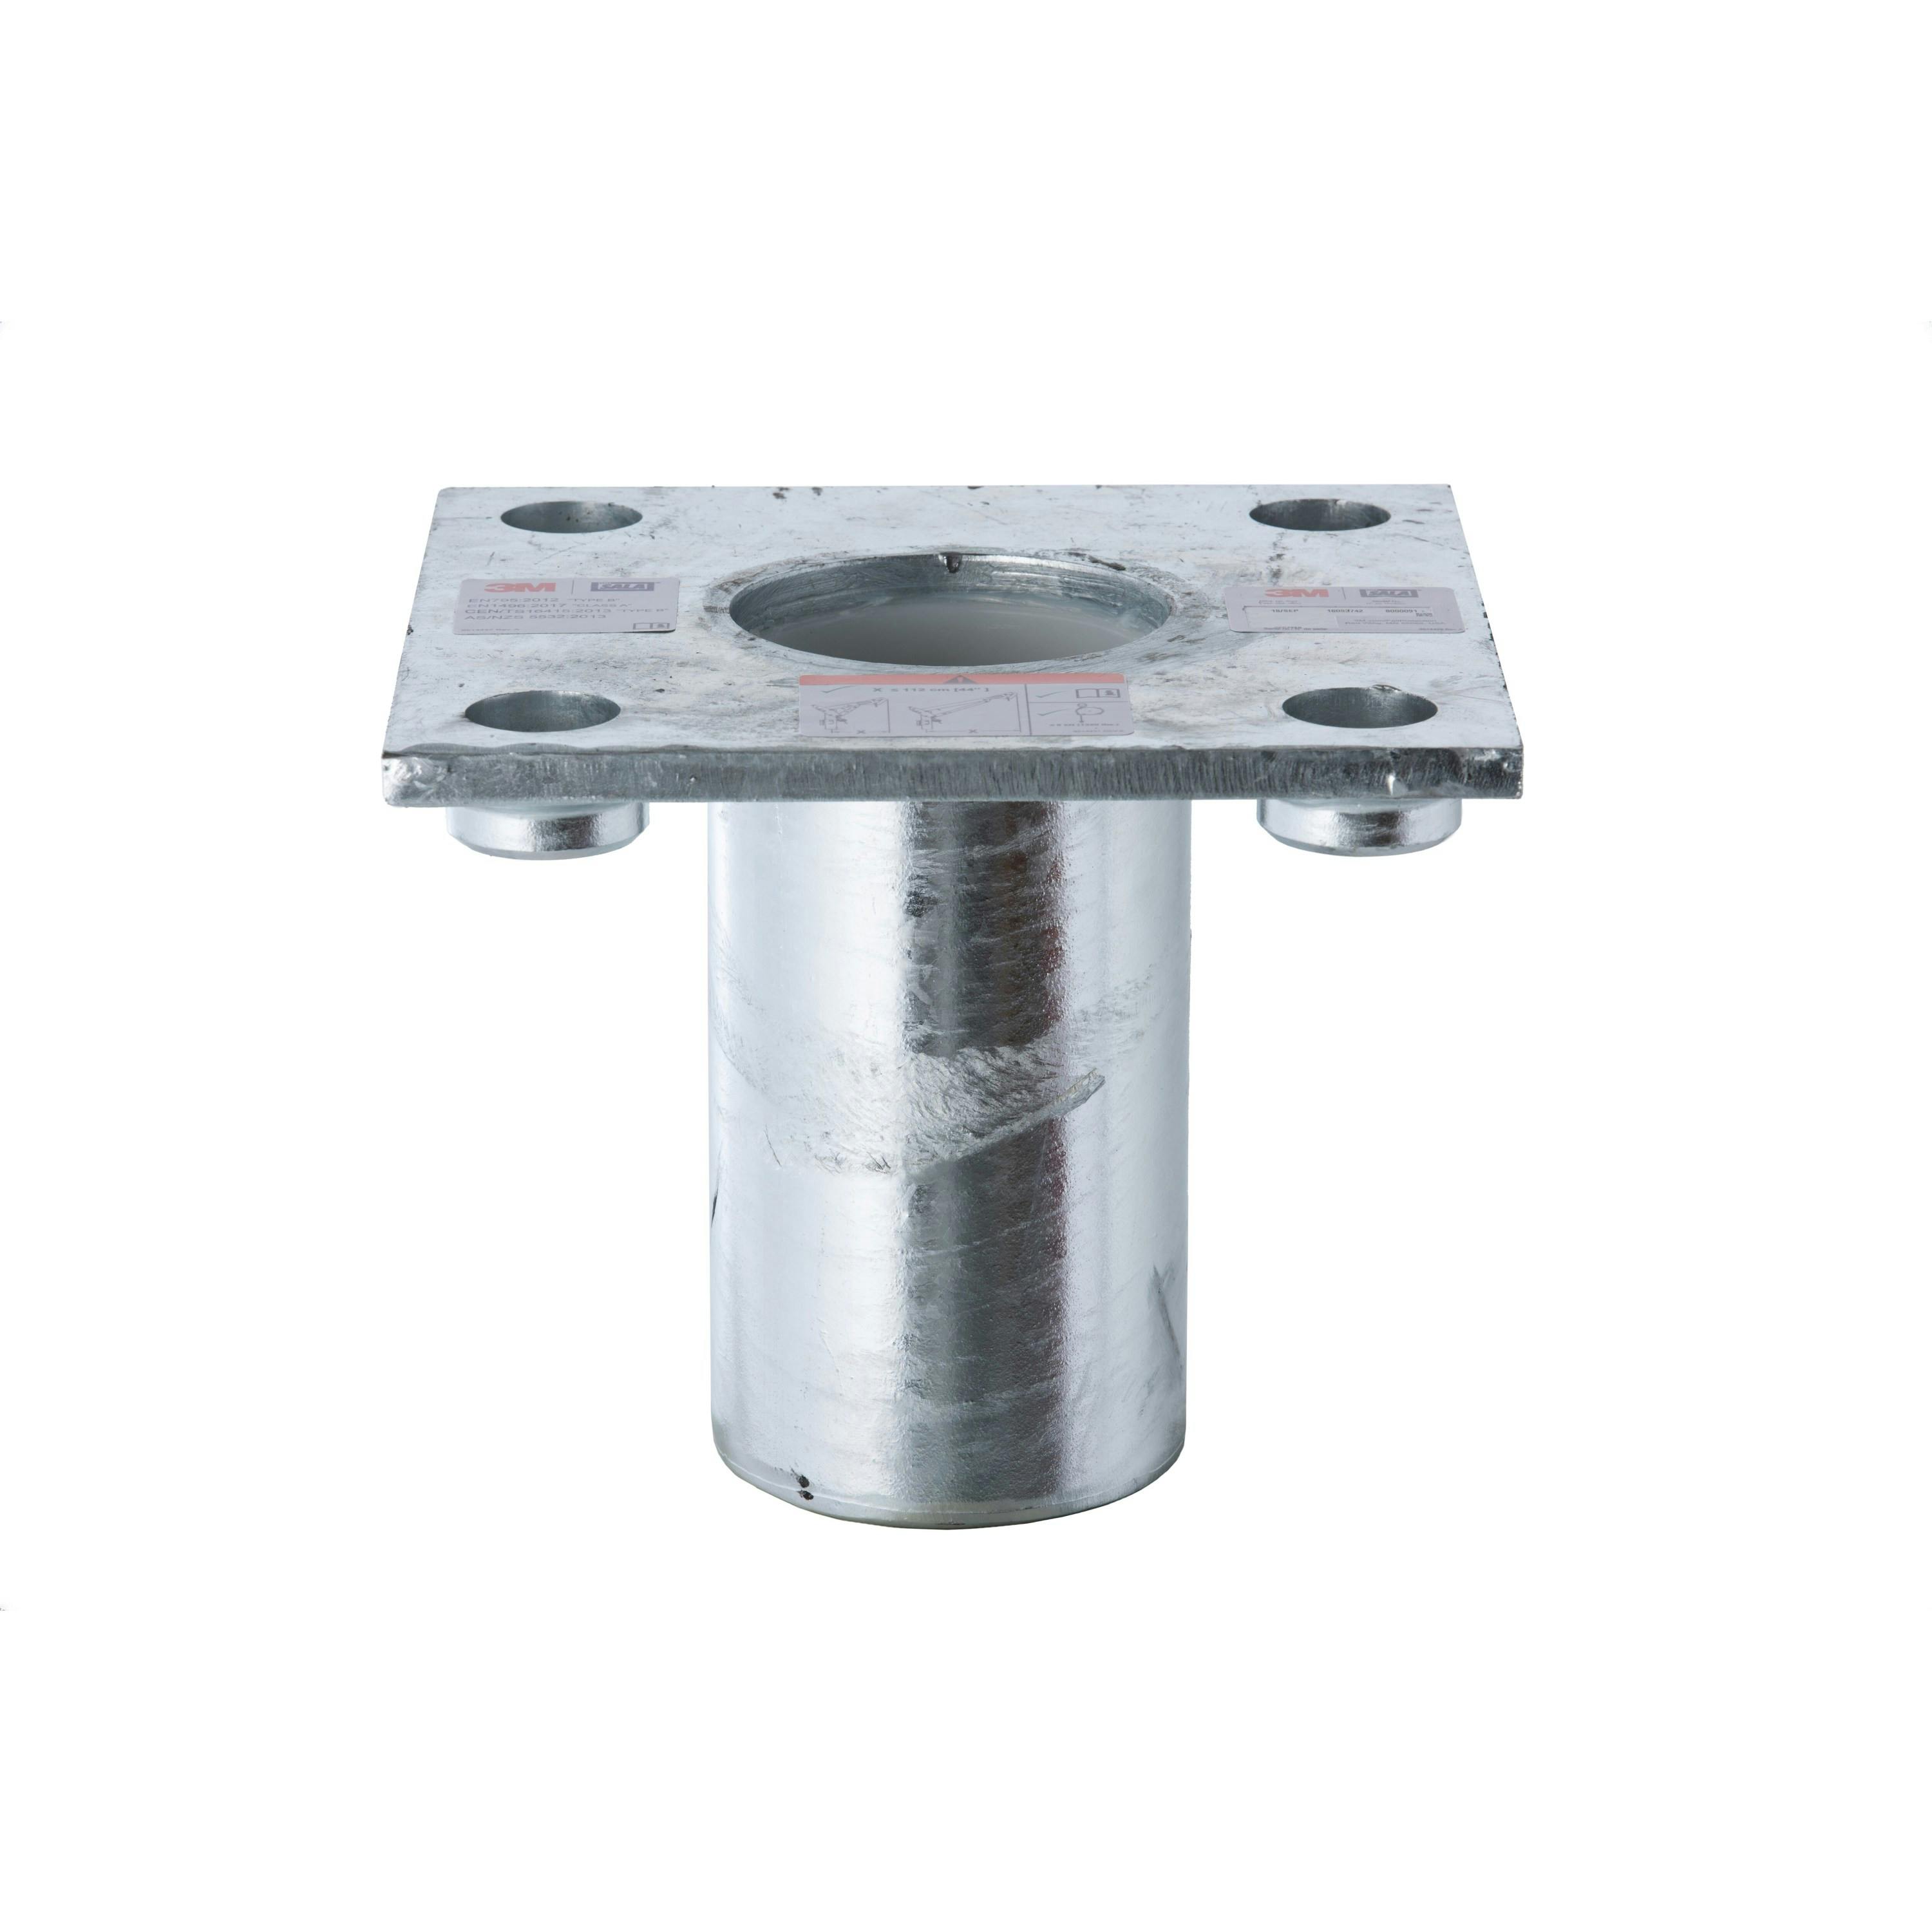 3M™ DBI-SALA® Confined Space, Core Insert Base with Top Plate HC Galvanized 8000091, 1 EA/Case